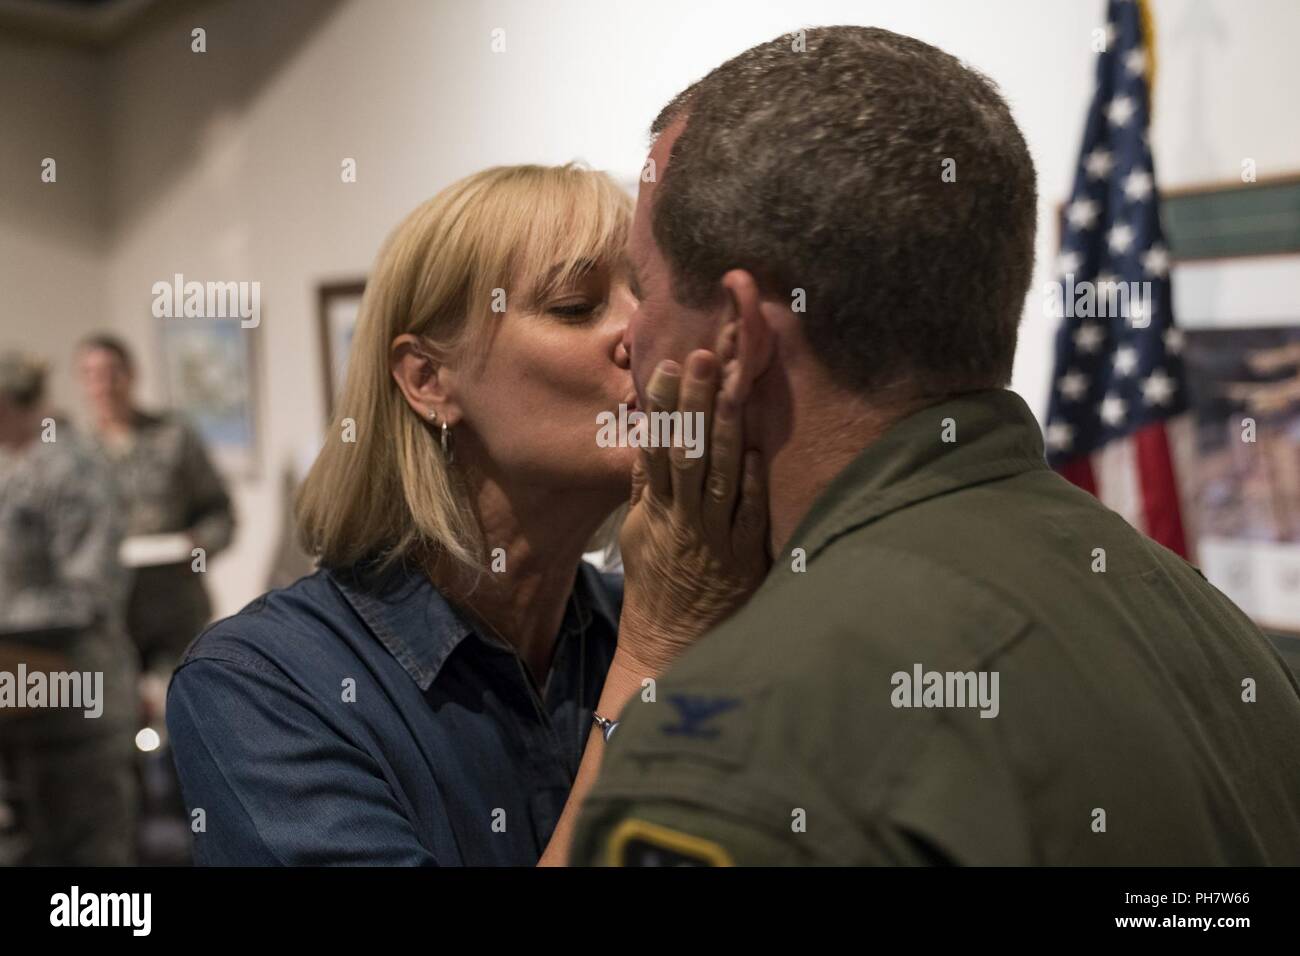 Martha Brett kisses her husband, Col. Jeffrey Brett, during a retirement ceremony at the Museum of Aviation, Robins Air Force Base, Ga., June 22, 2018. Brett is a former commander of the 413th Flight Test Group who served in the position from March 2015 to June 2016. His most recent assignment was at Stuttgart, Germany, as a battle watch captain for the U.S. European Command. Stock Photo